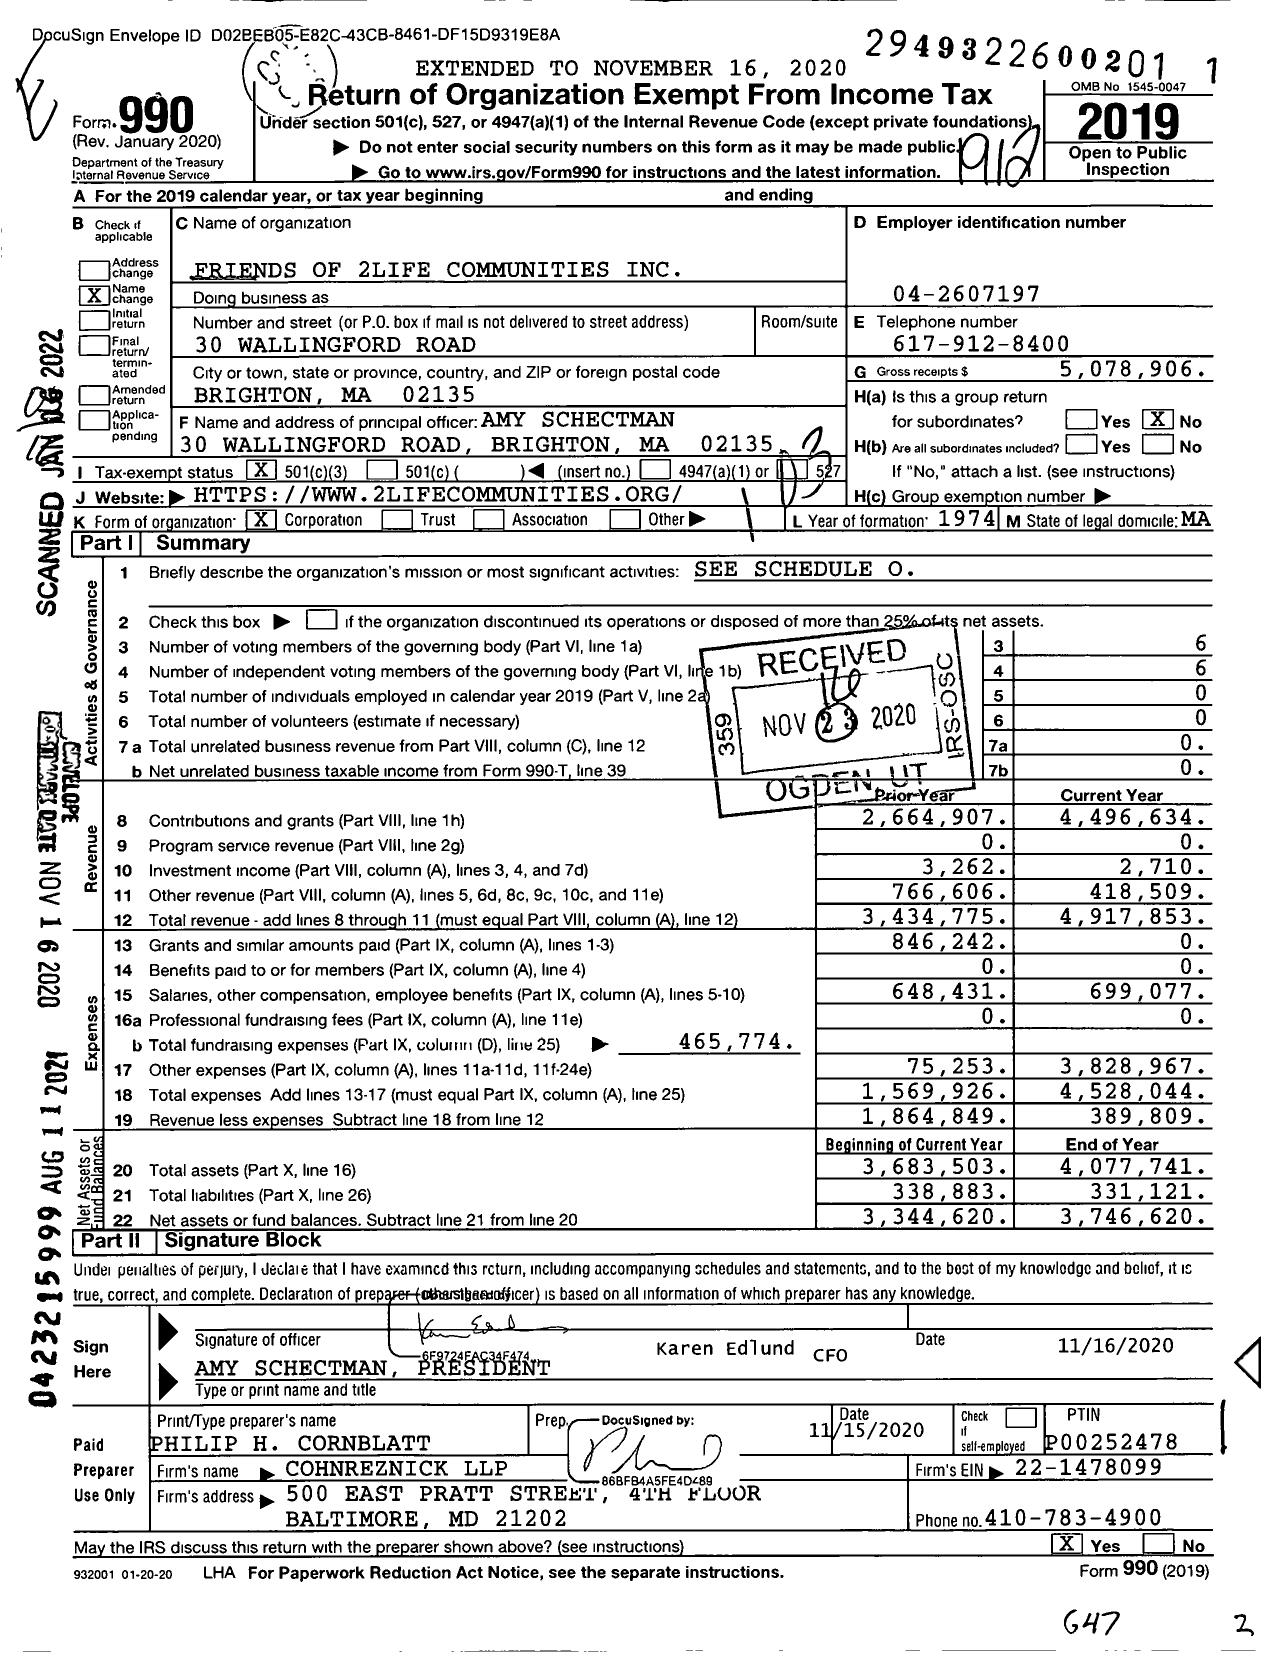 Image of first page of 2019 Form 990 for Friends of 2life Communities